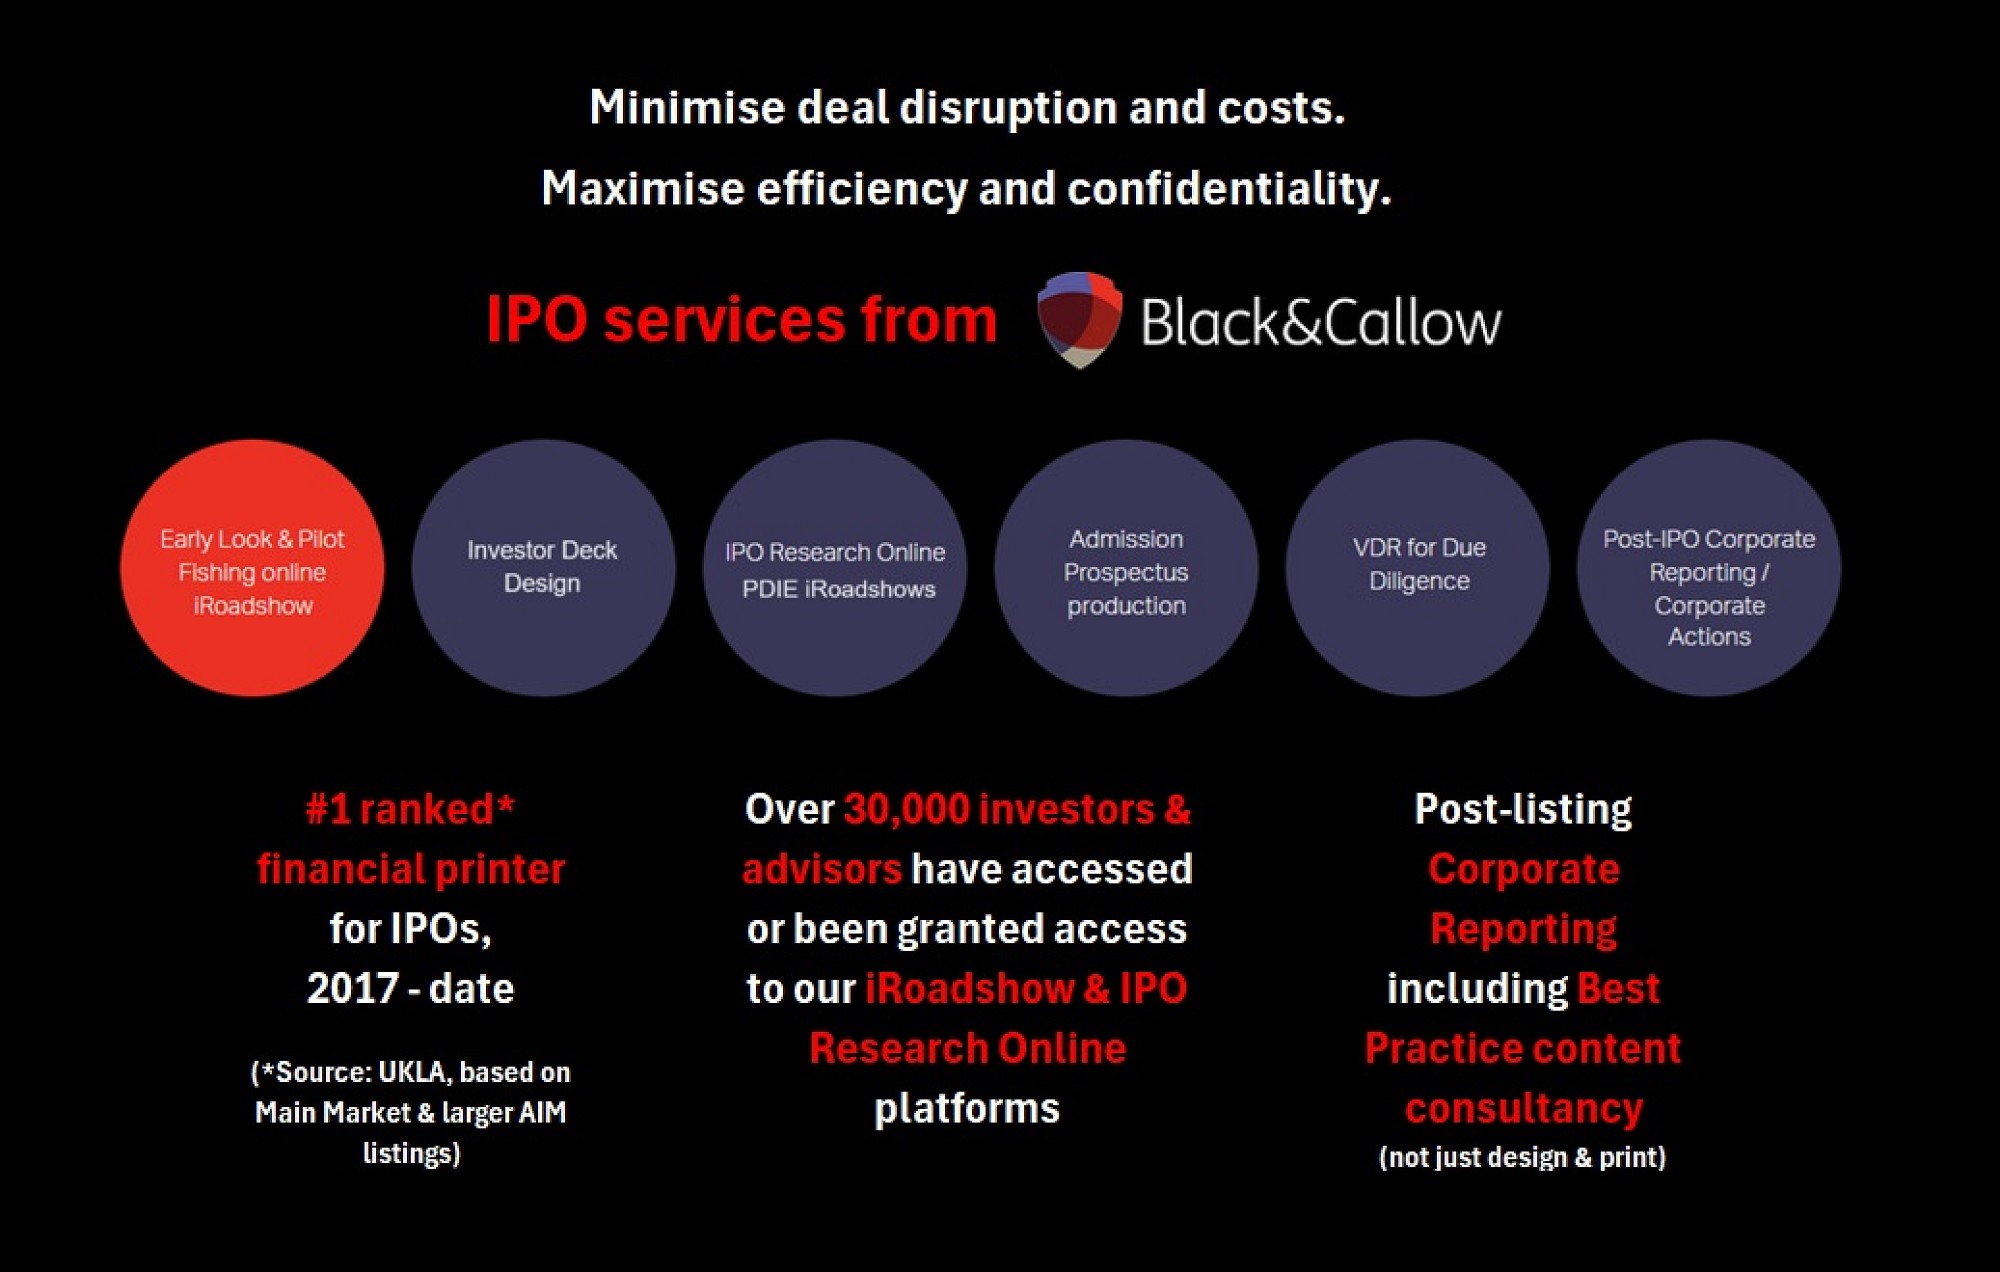 Planning an IPO? Here's how to minimise deal disruption & costs while maximising efficiency & confidentiality across your investor comms.